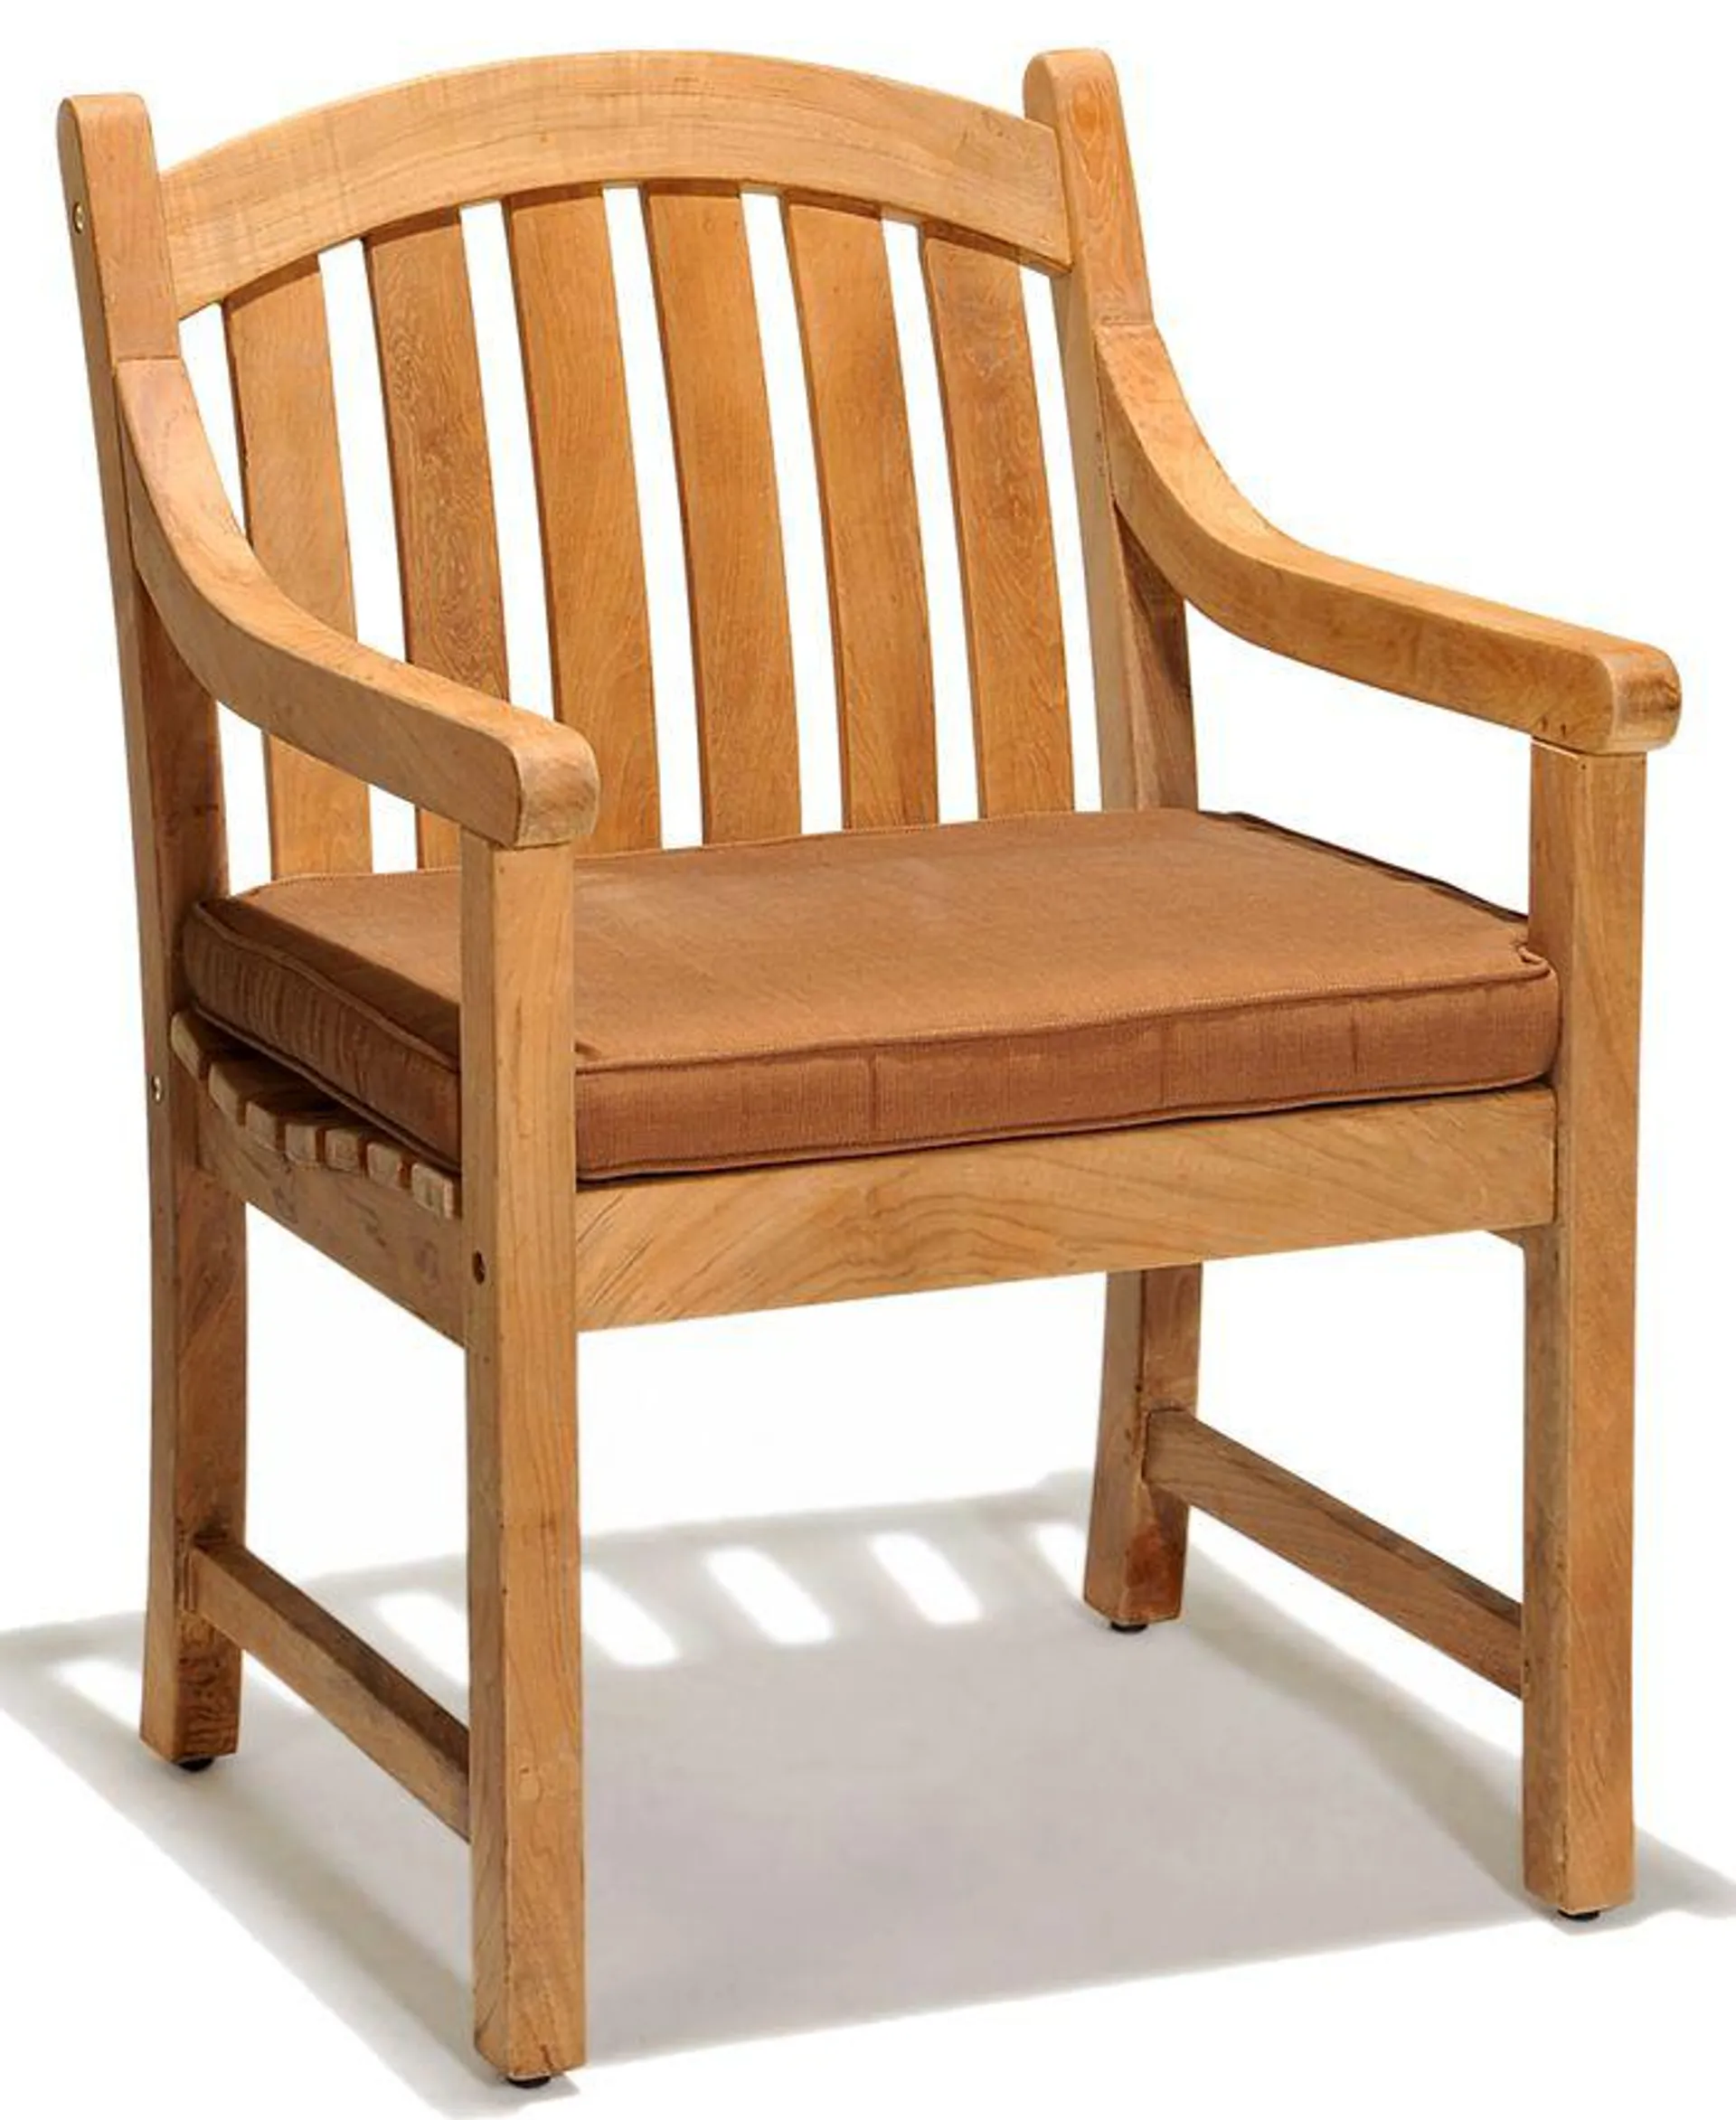 Bristol Teak Outdoor Dining Chair, Created for Macy's